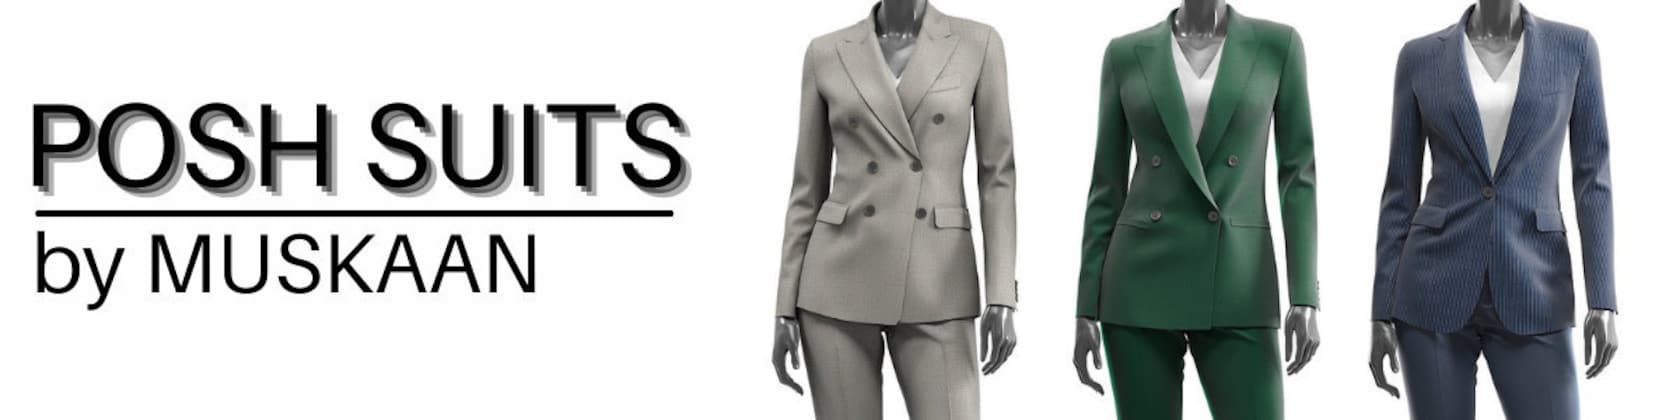 YELLOW SUIT for Women/ Double Breasted Suit/womens Suit/women Pant Suit/business  Suit Women/women Tailored Suit/womens Coats Suit Set/ 